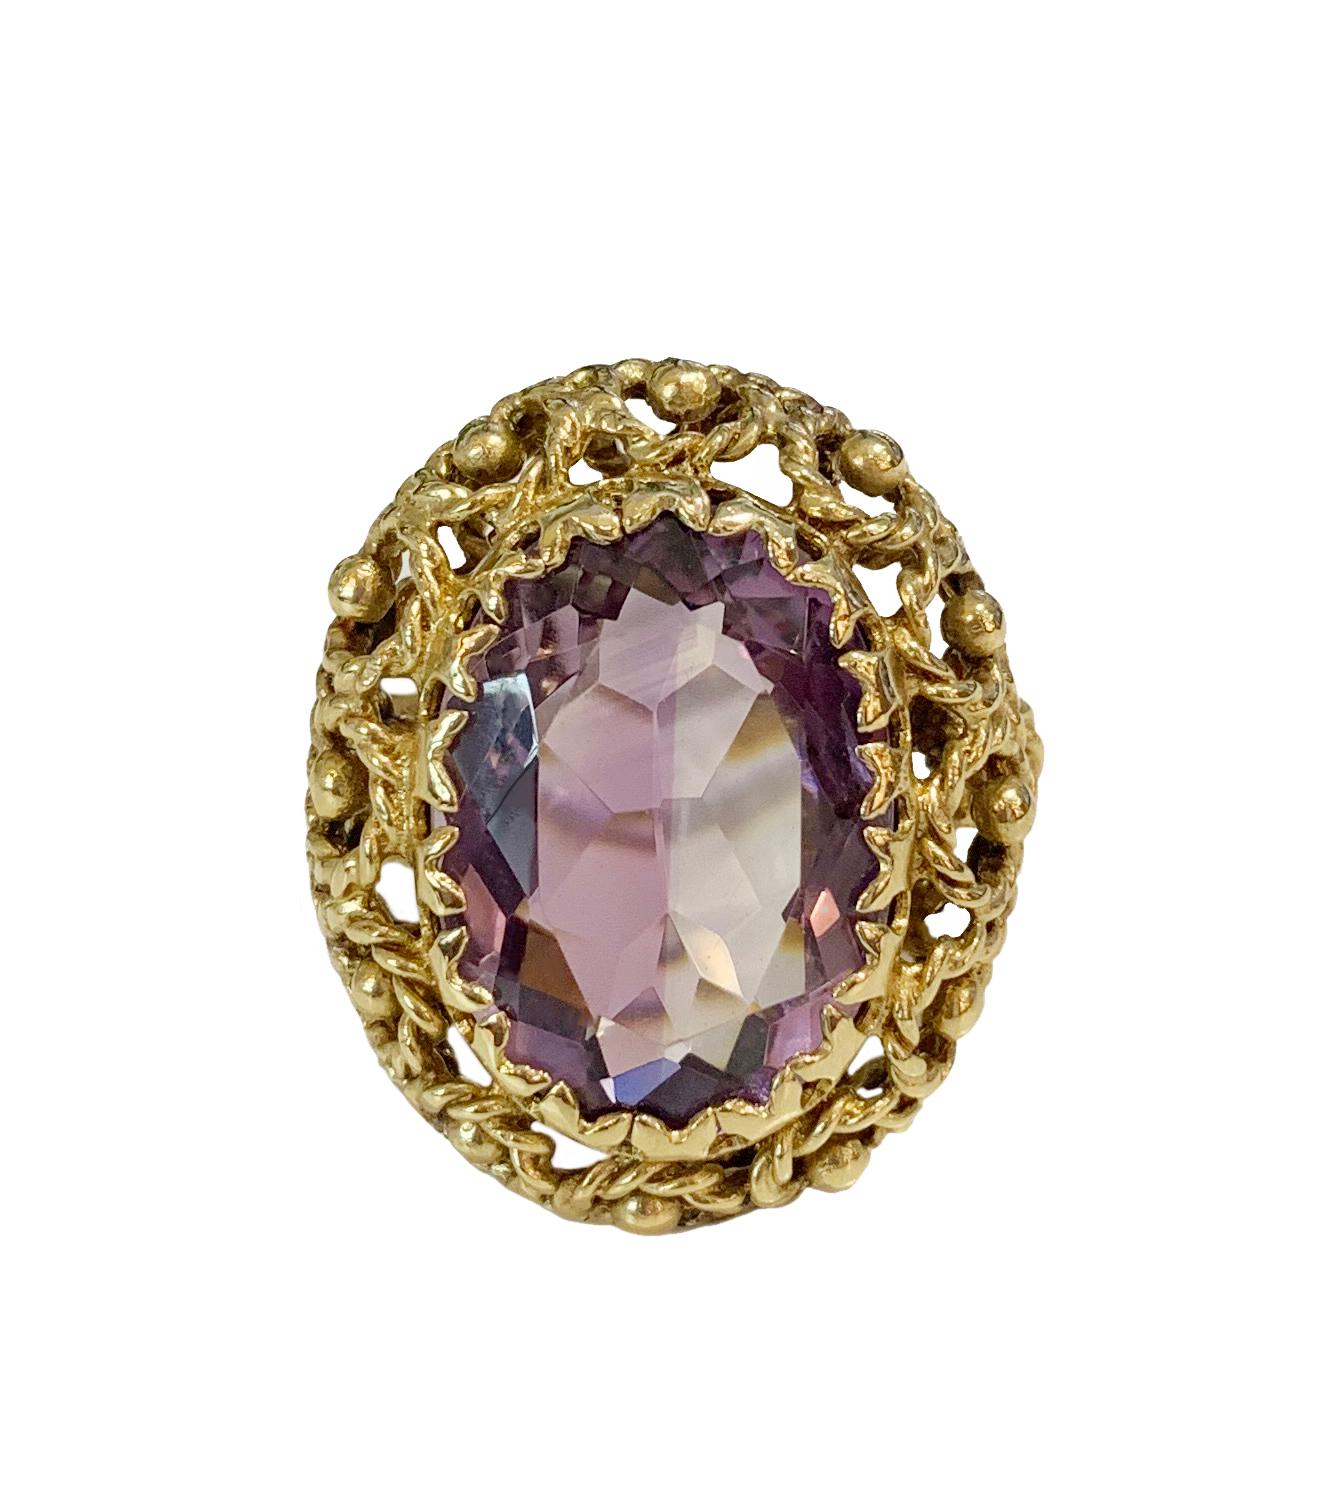 -14k Yellow Gold
-Ring size: 9.25
-Ring Dimension: 0.8x1.0”
-Weight: 13.2
-Amethyst dimension: 0.4x0.6”
-Retail: $2000